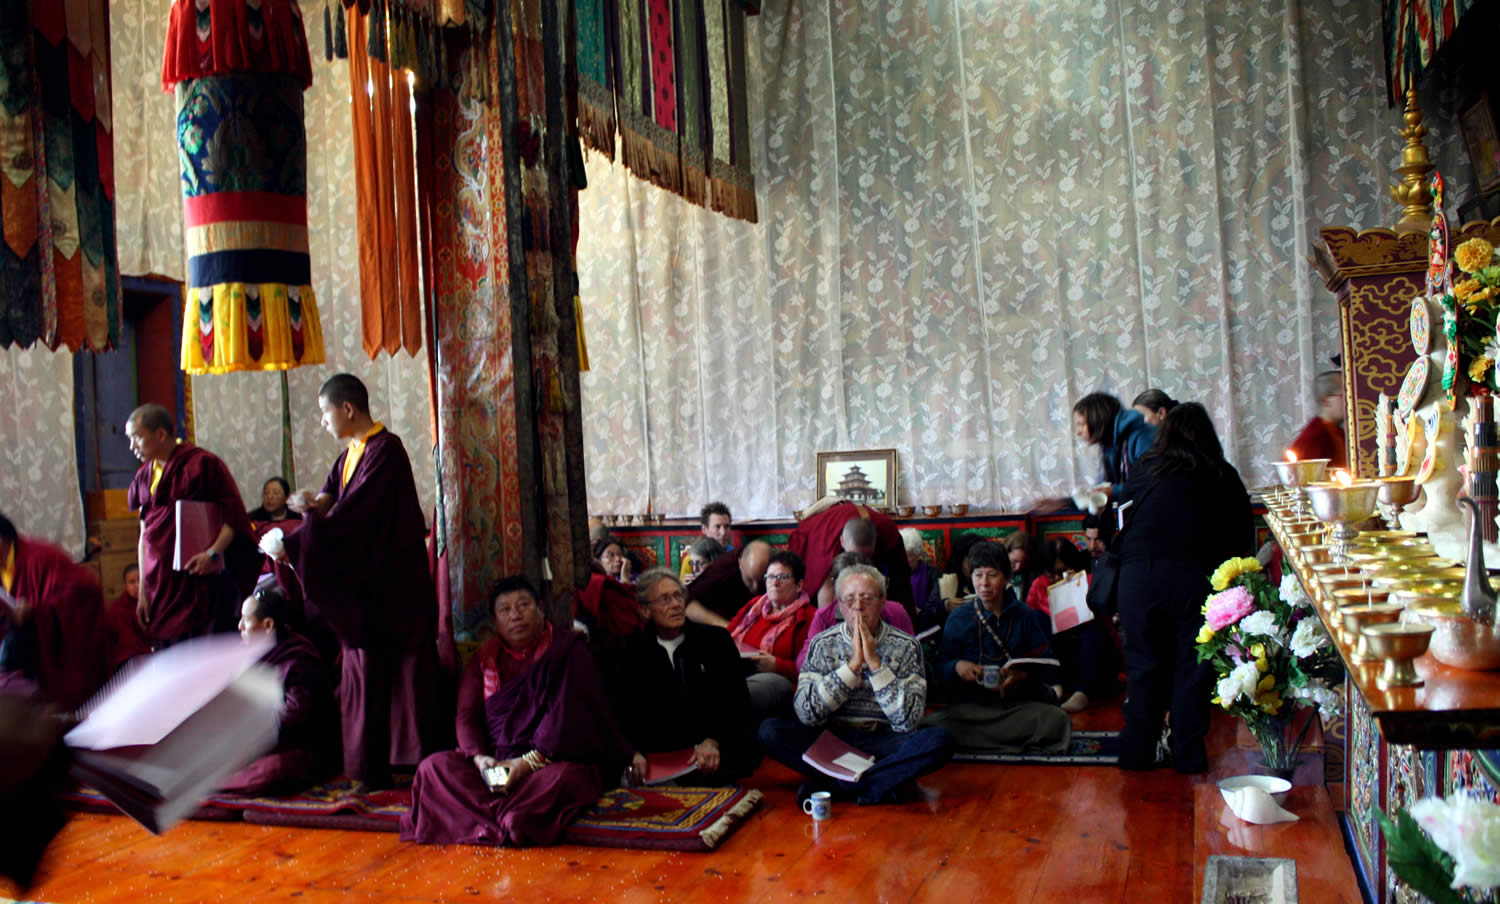 Offering prayers in the shrine room at Tharpaling Monastery.